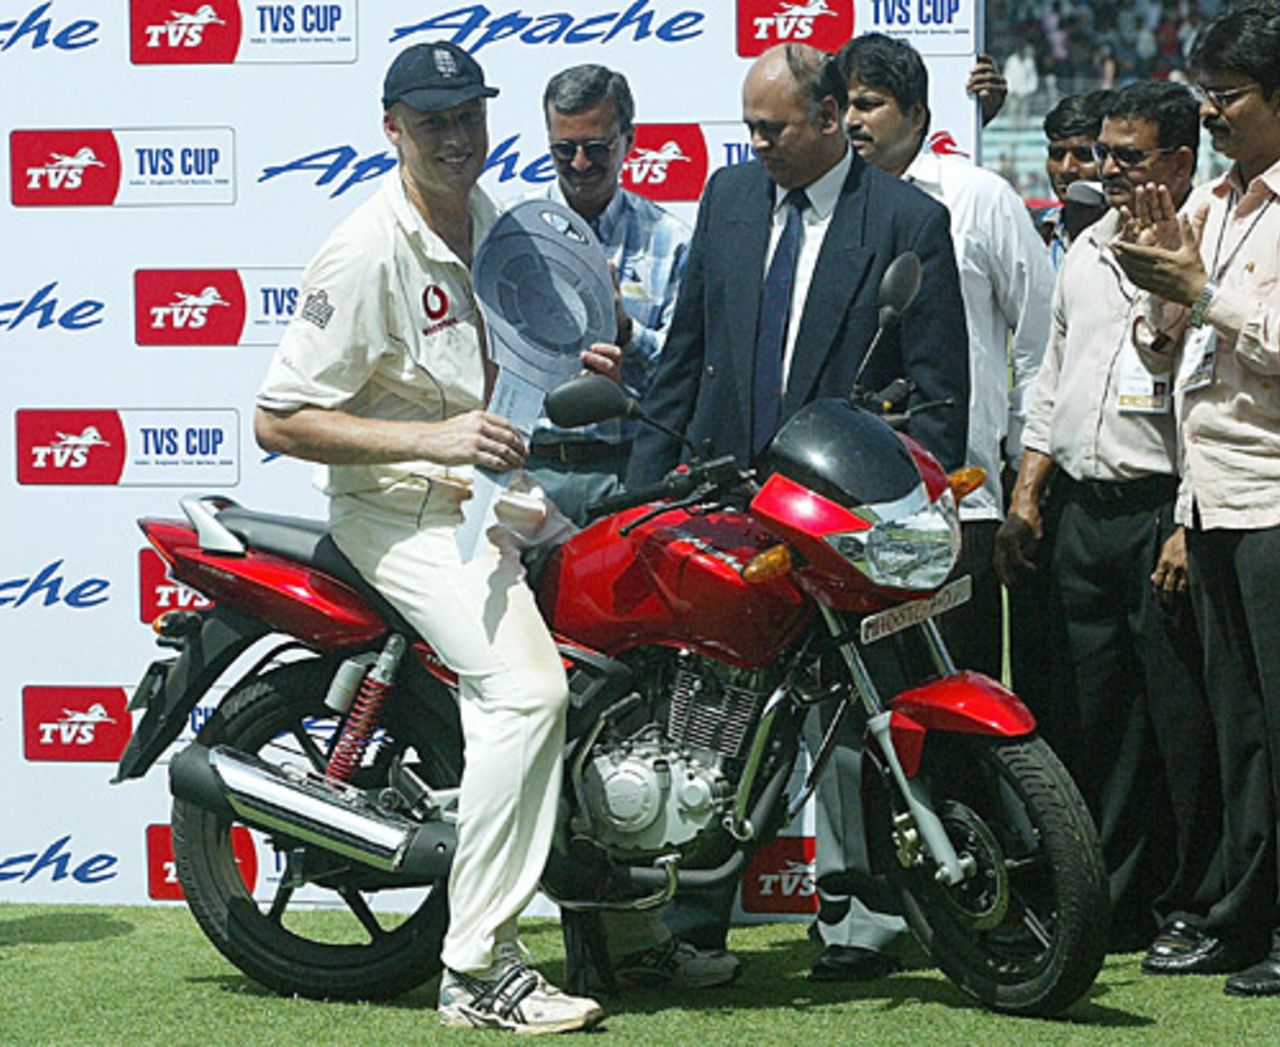 Andrew Flintoff was given a bike as his Man-of-the-Match award, India v England, 3rd Test, Mumbai, March 22, 2006